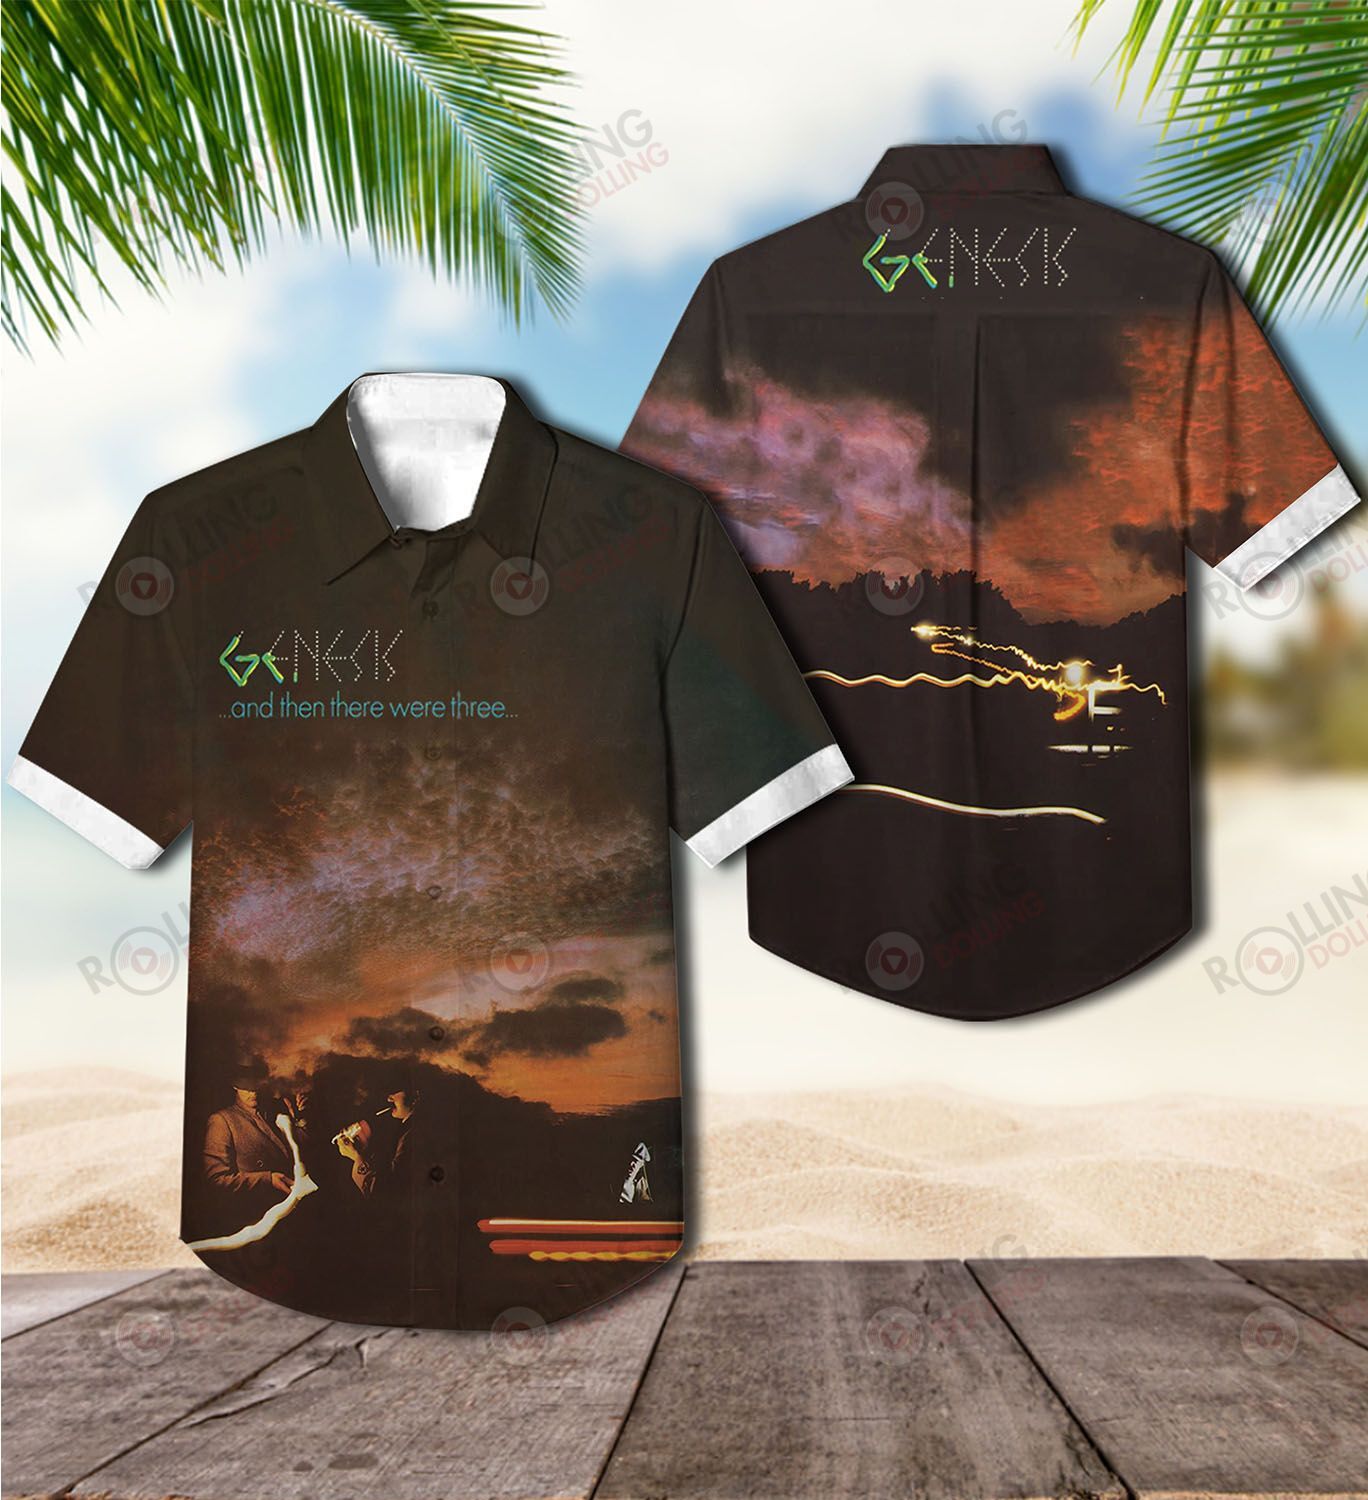 This would make a great gift for any fan who loves Hawaiian Shirt as well as Rock band 61